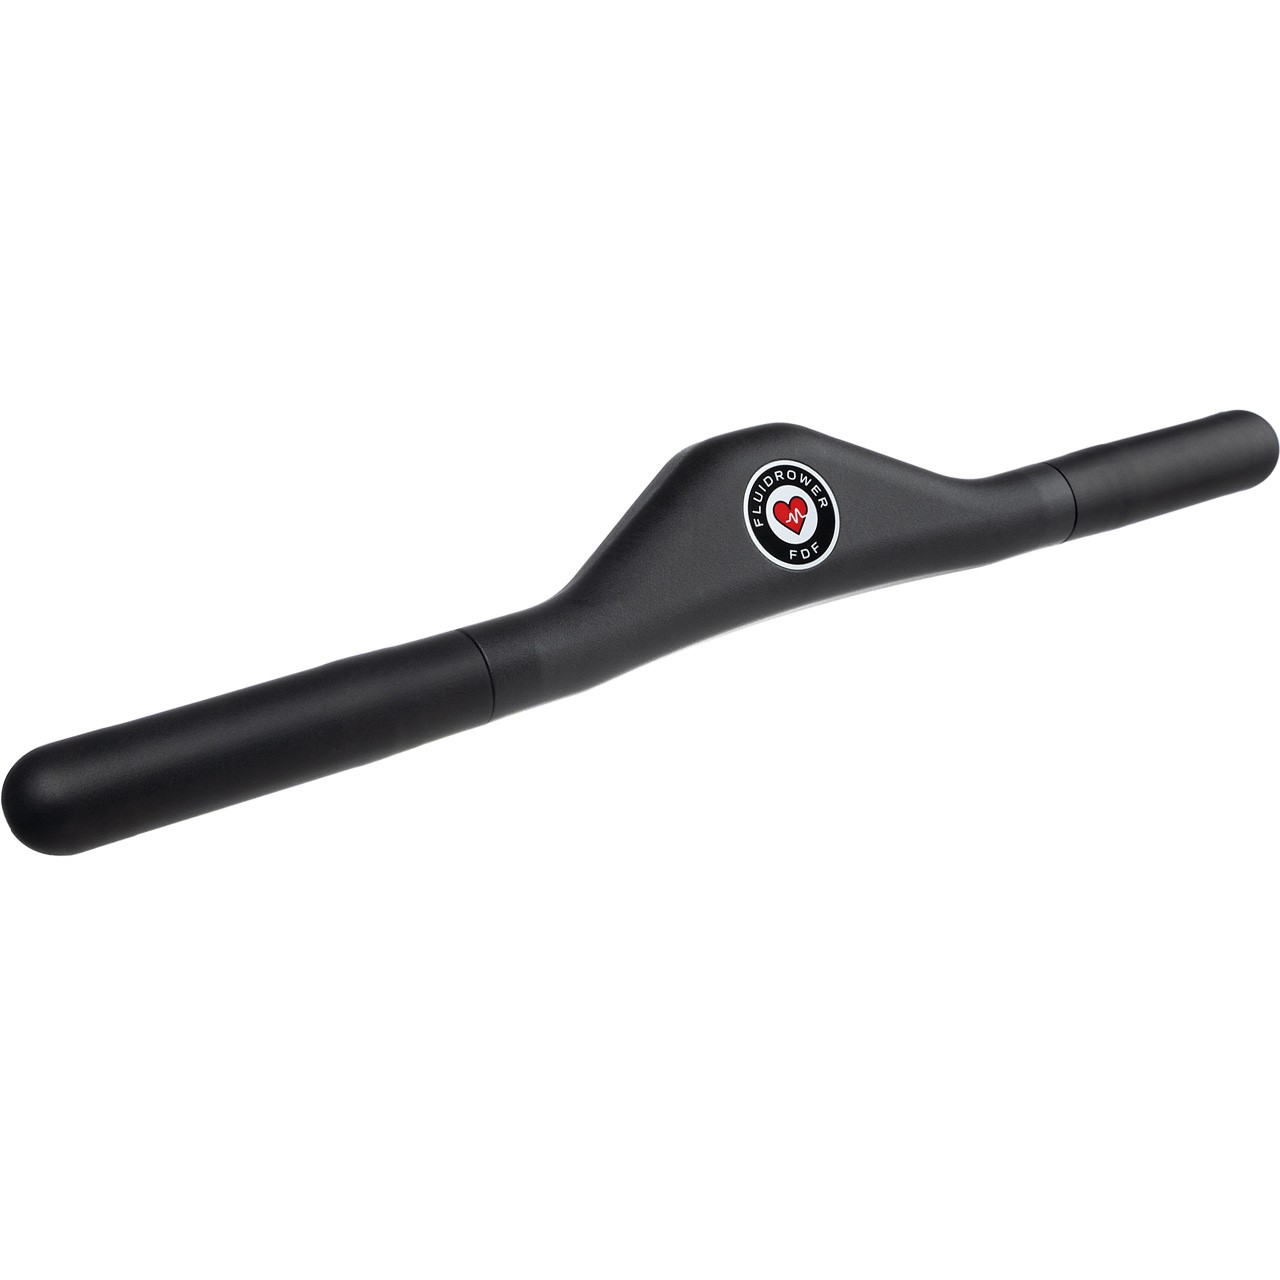 Fluid Rower Touch Heart Rate Handle - V, XL Models